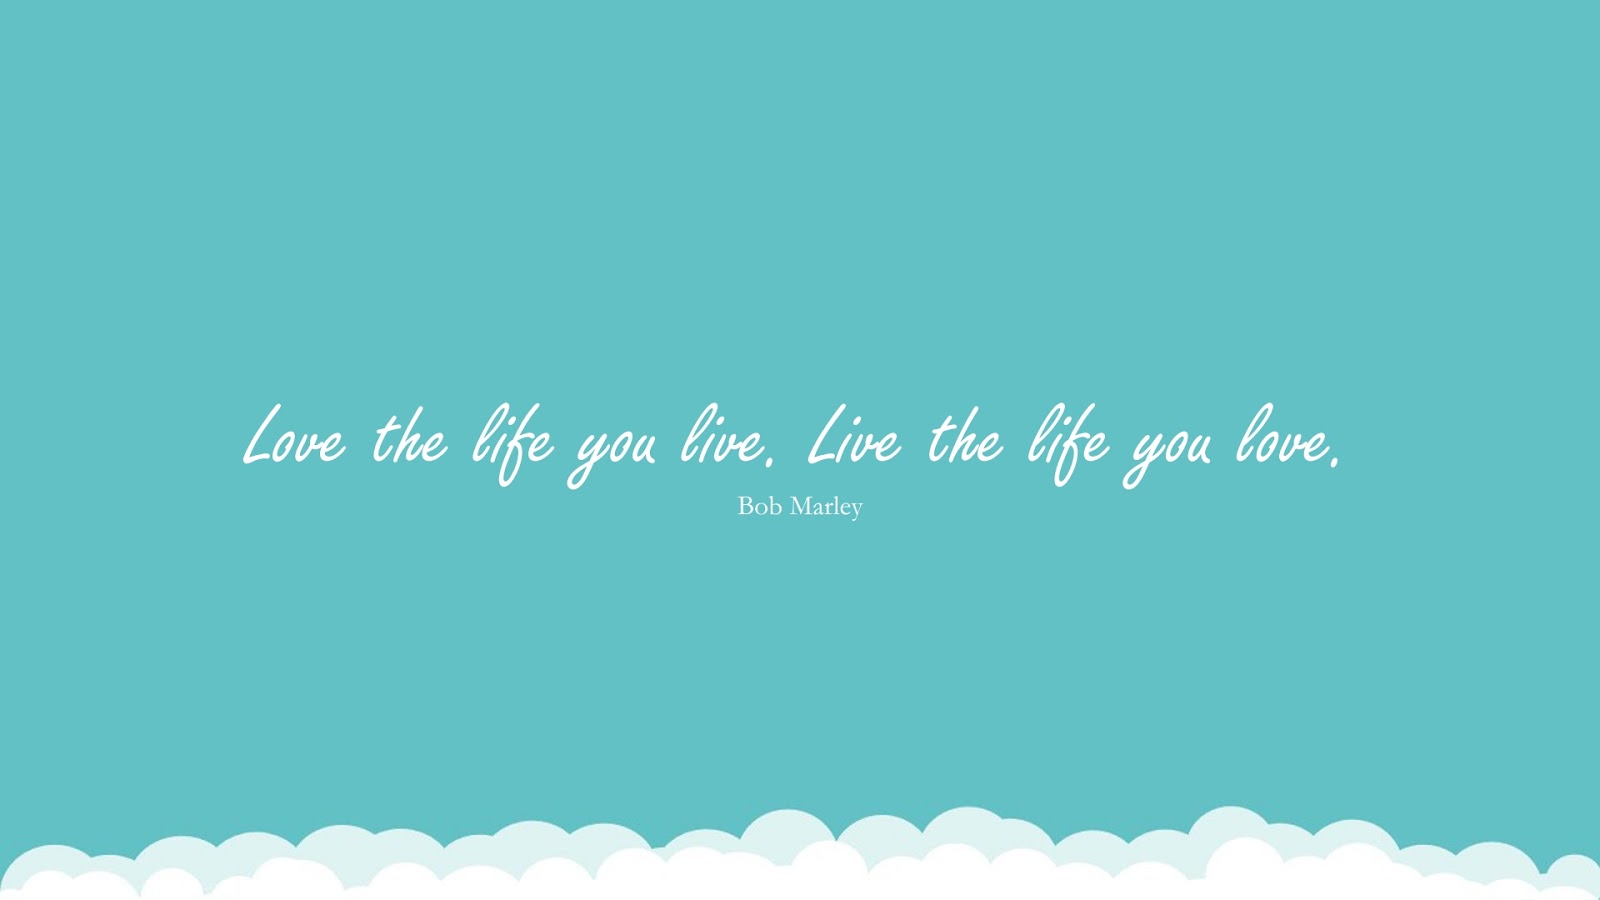 Love the life you live. Live the life you love. (Bob Marley);  #LifeQuotes